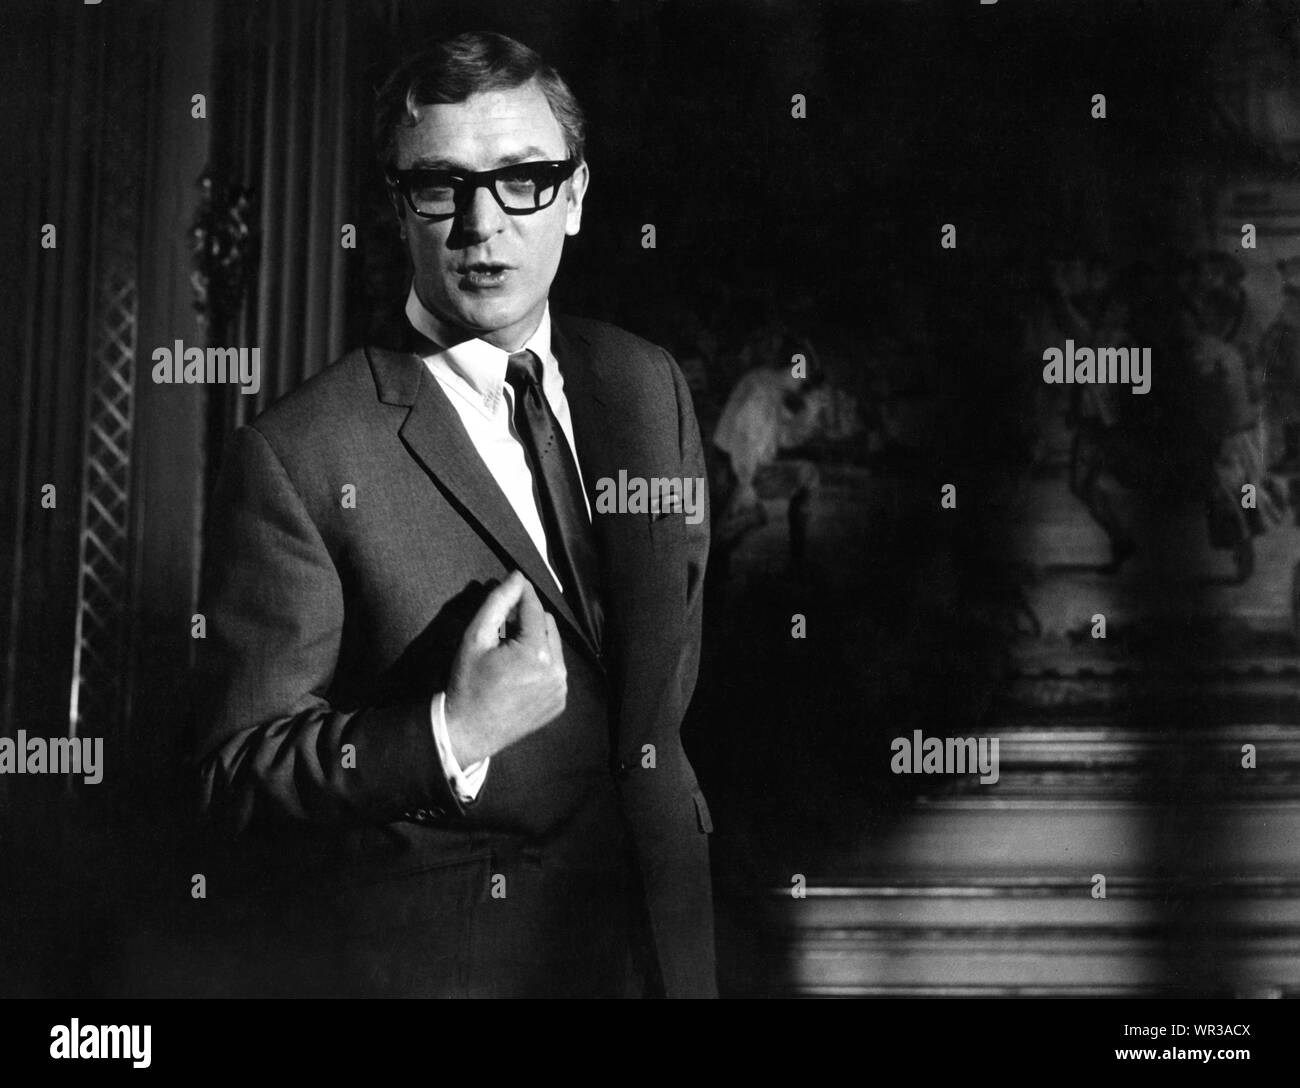 MICHAEL CAINE as Harry Palmer in FUNERAL IN BERLIN 1966 director Guy Hamilton novel Len Deighton executive producer Harry Saltzman Jovera Pictures AG/SA  / Lowndes Productions Ltd / Paramount British Pictures Stock Photo